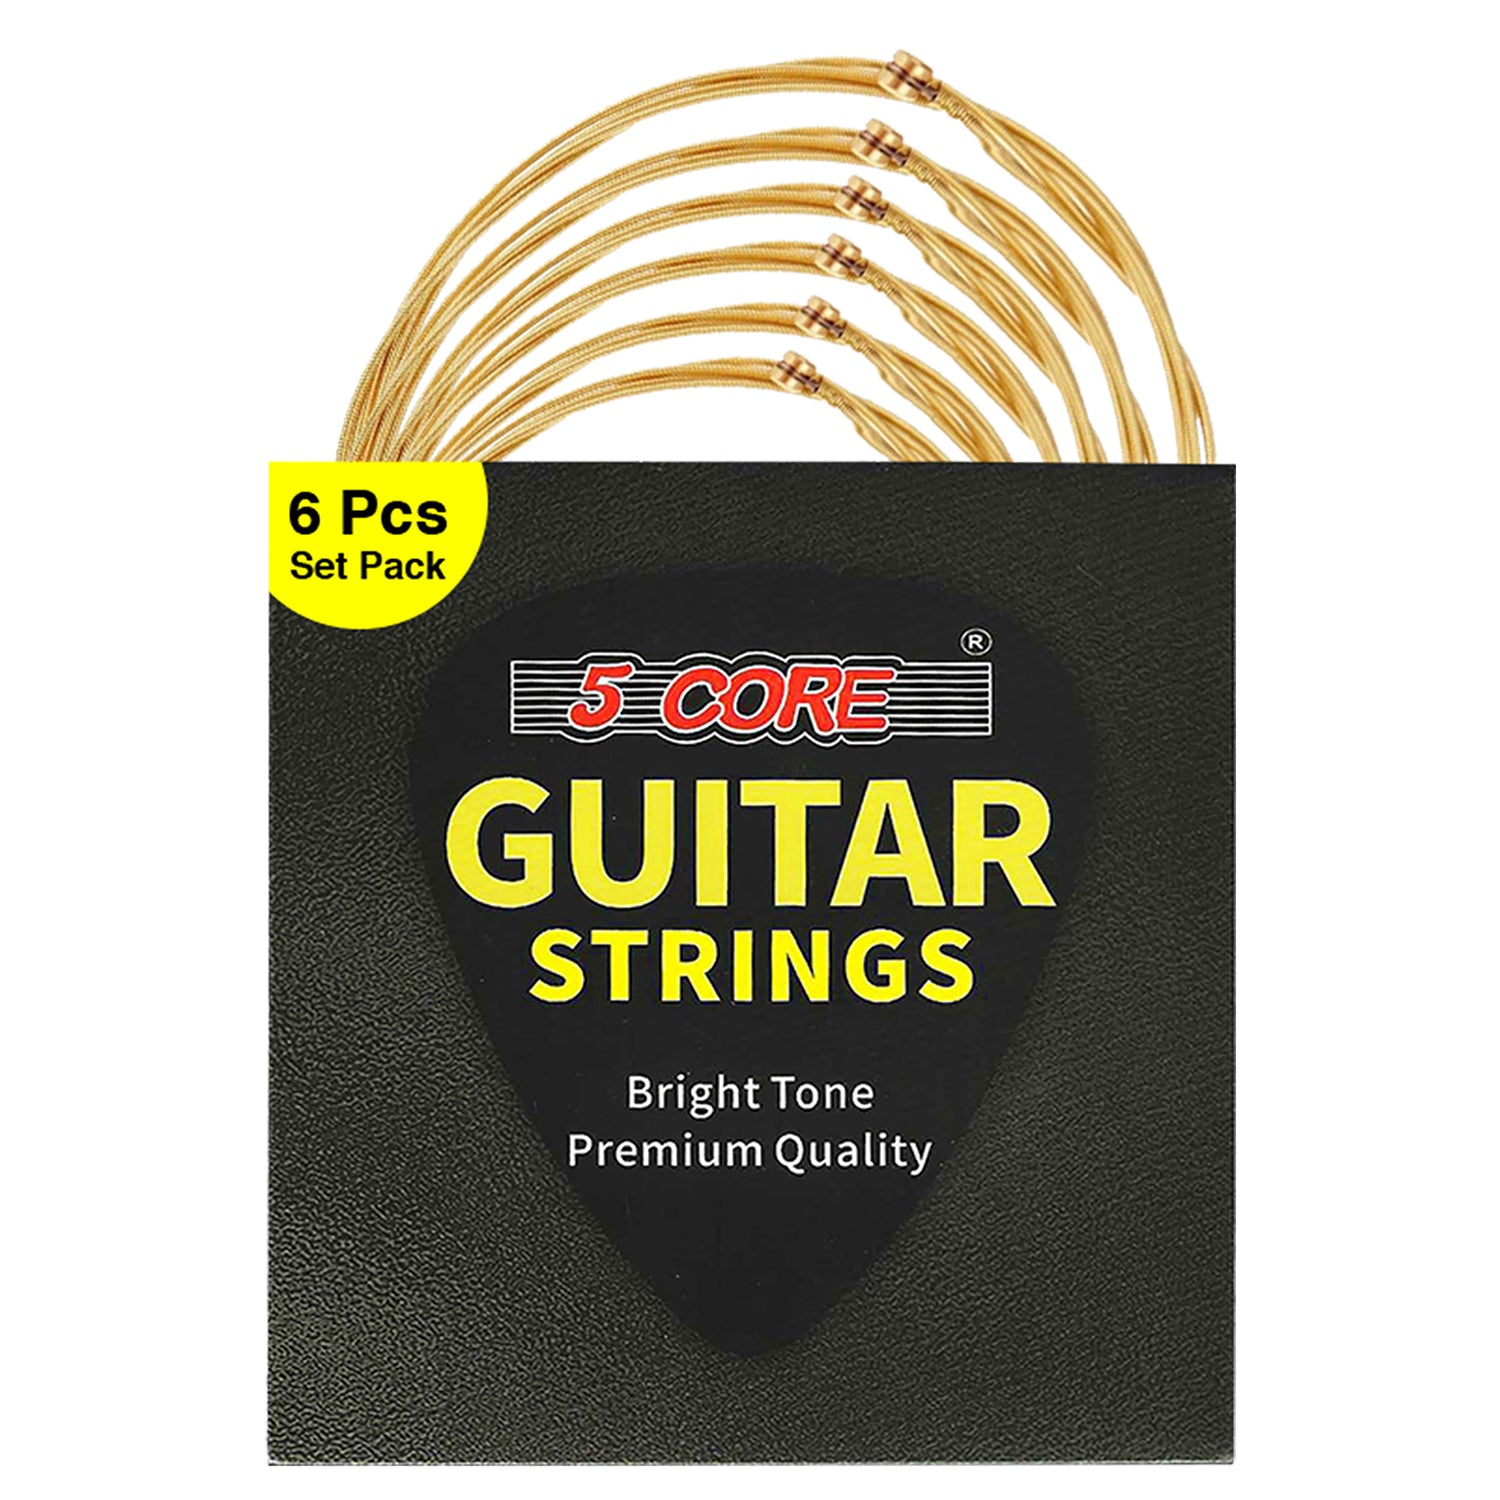 5Core Acoustic Guitar Strings  0.010-0.047 Phosphor Bronze w Deep Bright Tone for 6 String Guitars